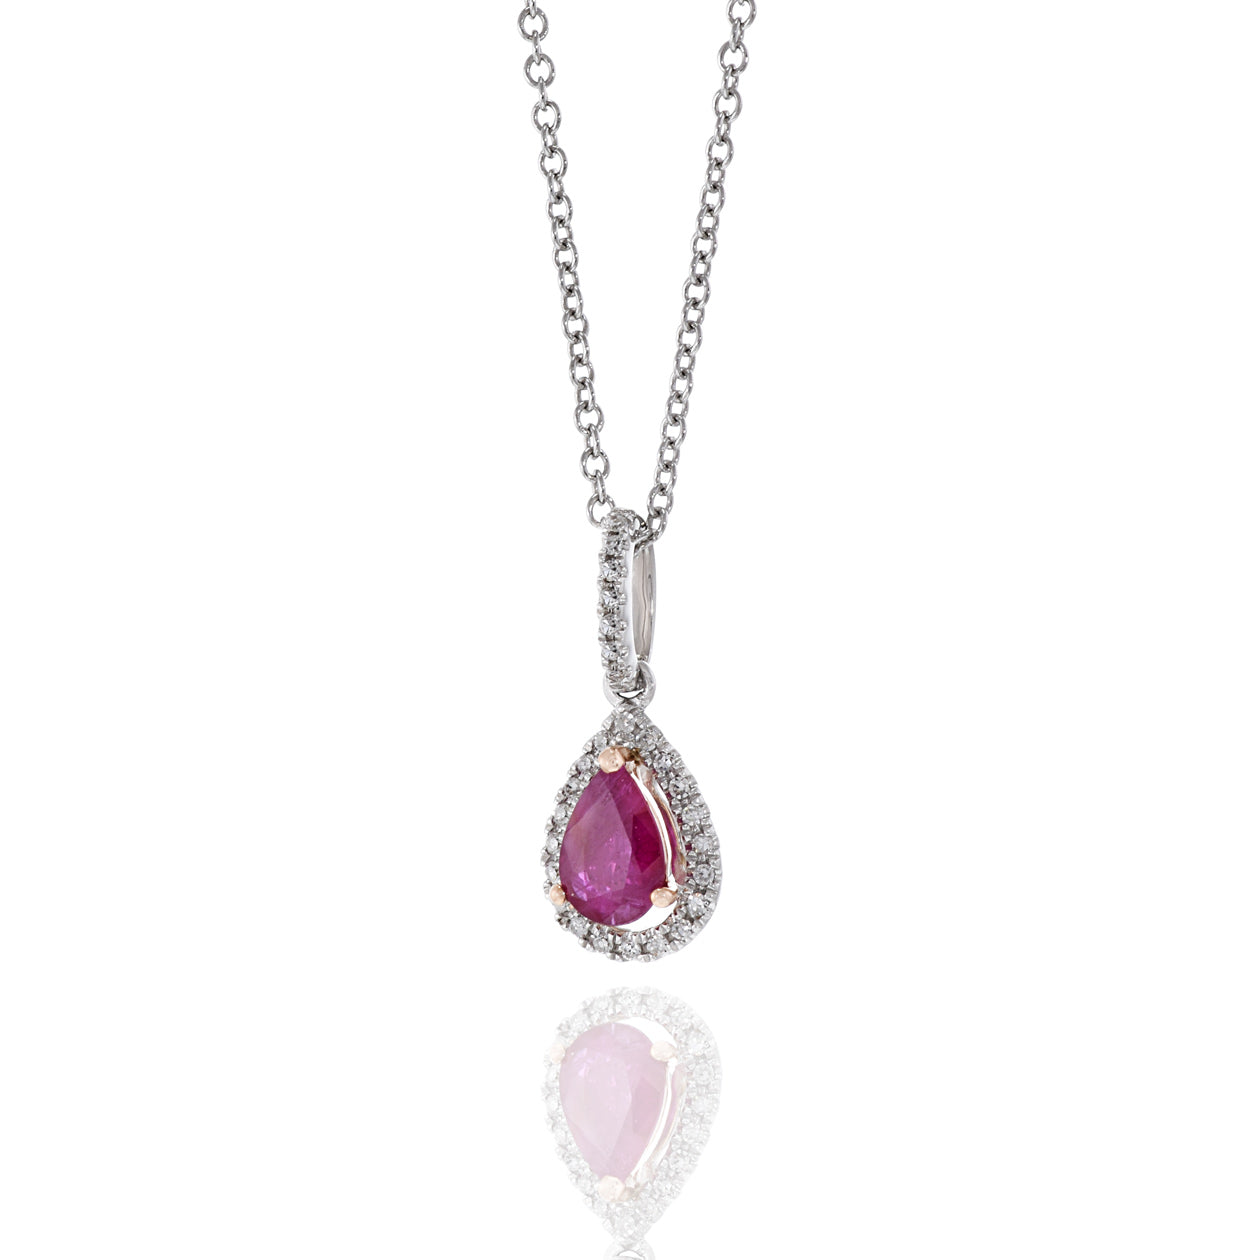 14KT White Gold Pear Shaped Ruby And Diamond Pendant